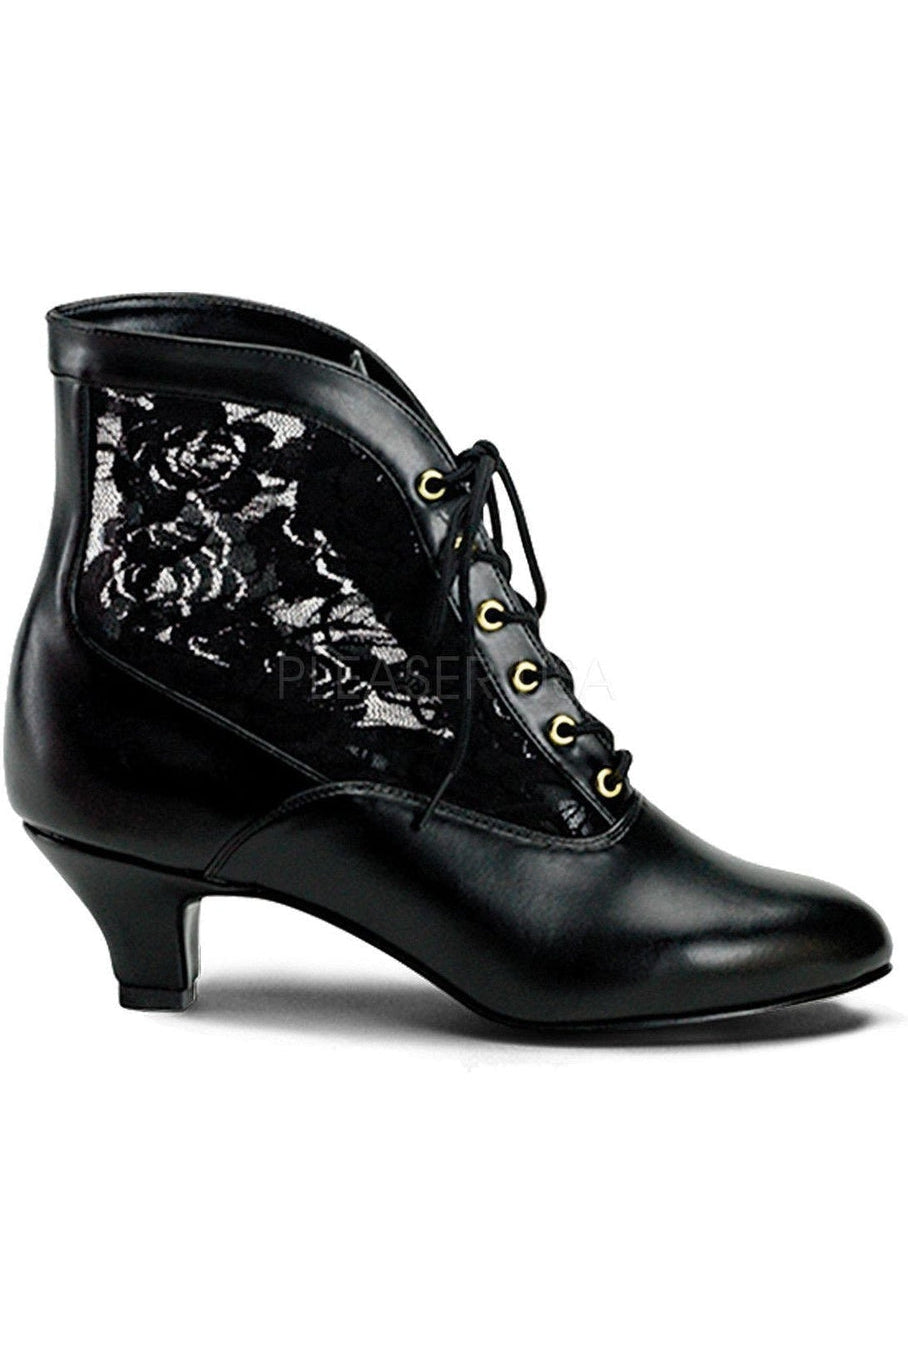 DAME-05 Ankle Boot | Black Lace-Funtasma-Black-Ankle Boots-SEXYSHOES.COM